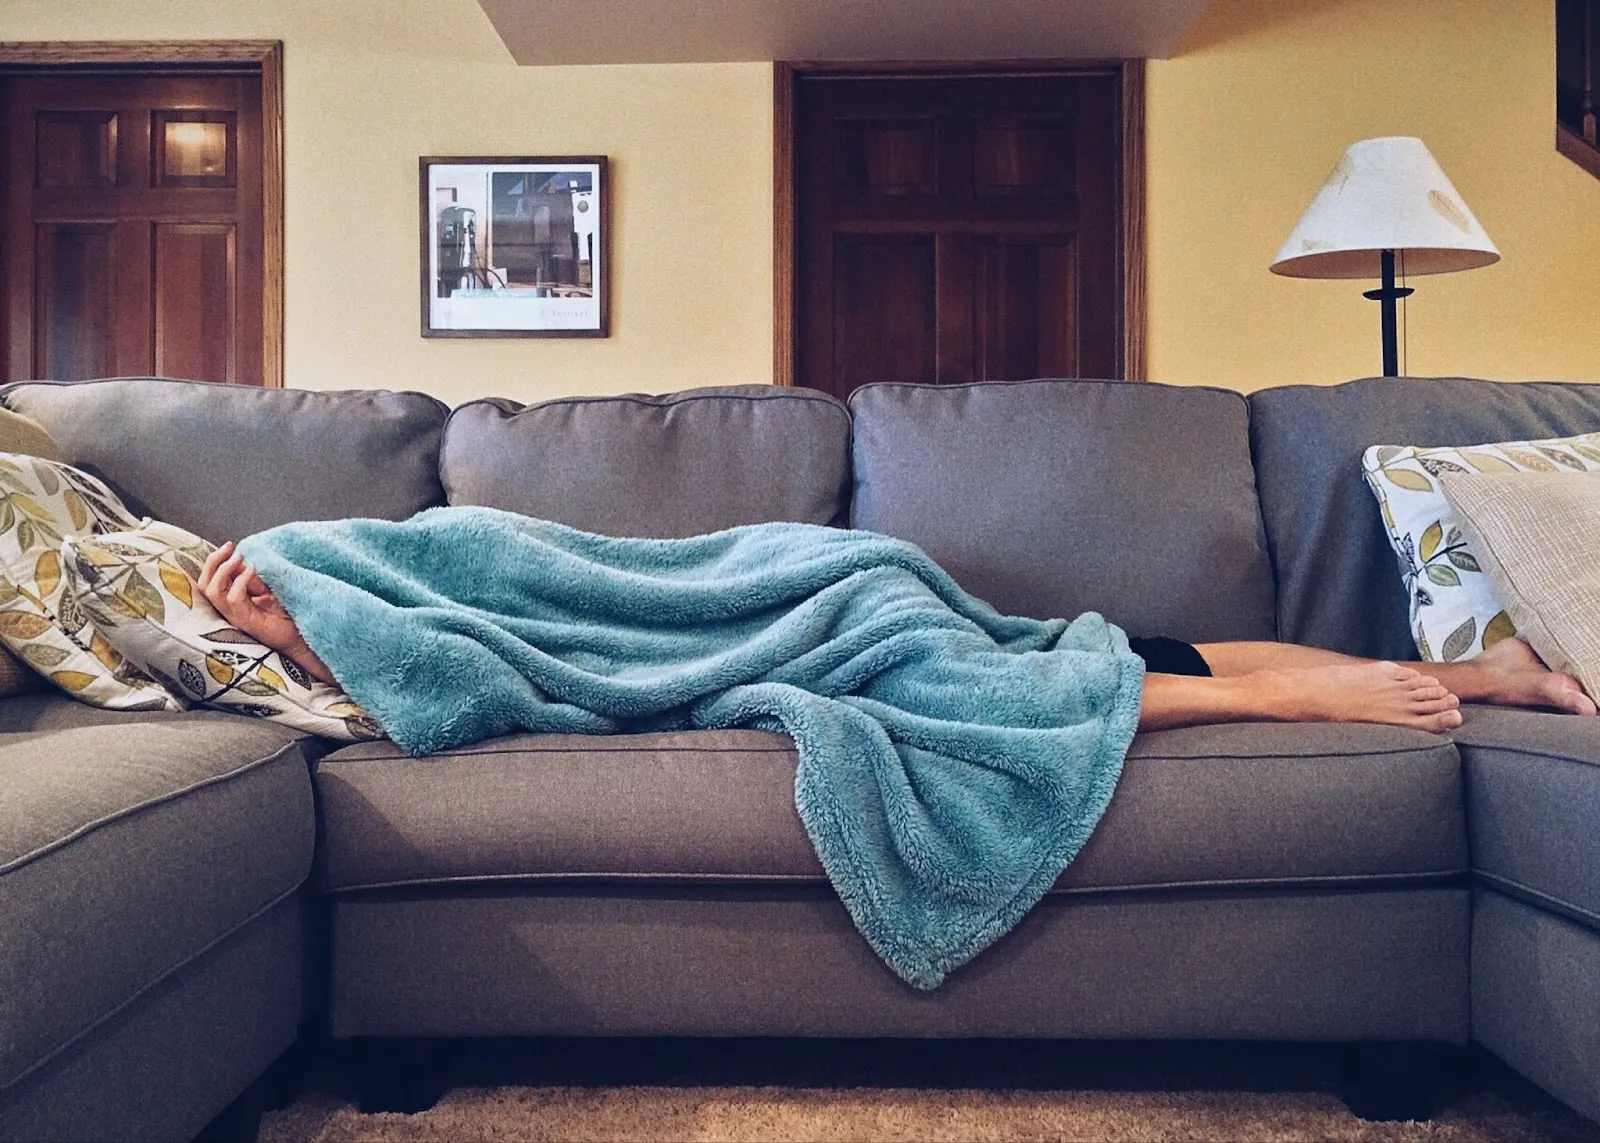 Person laying on couch in living area with blanket over top of them